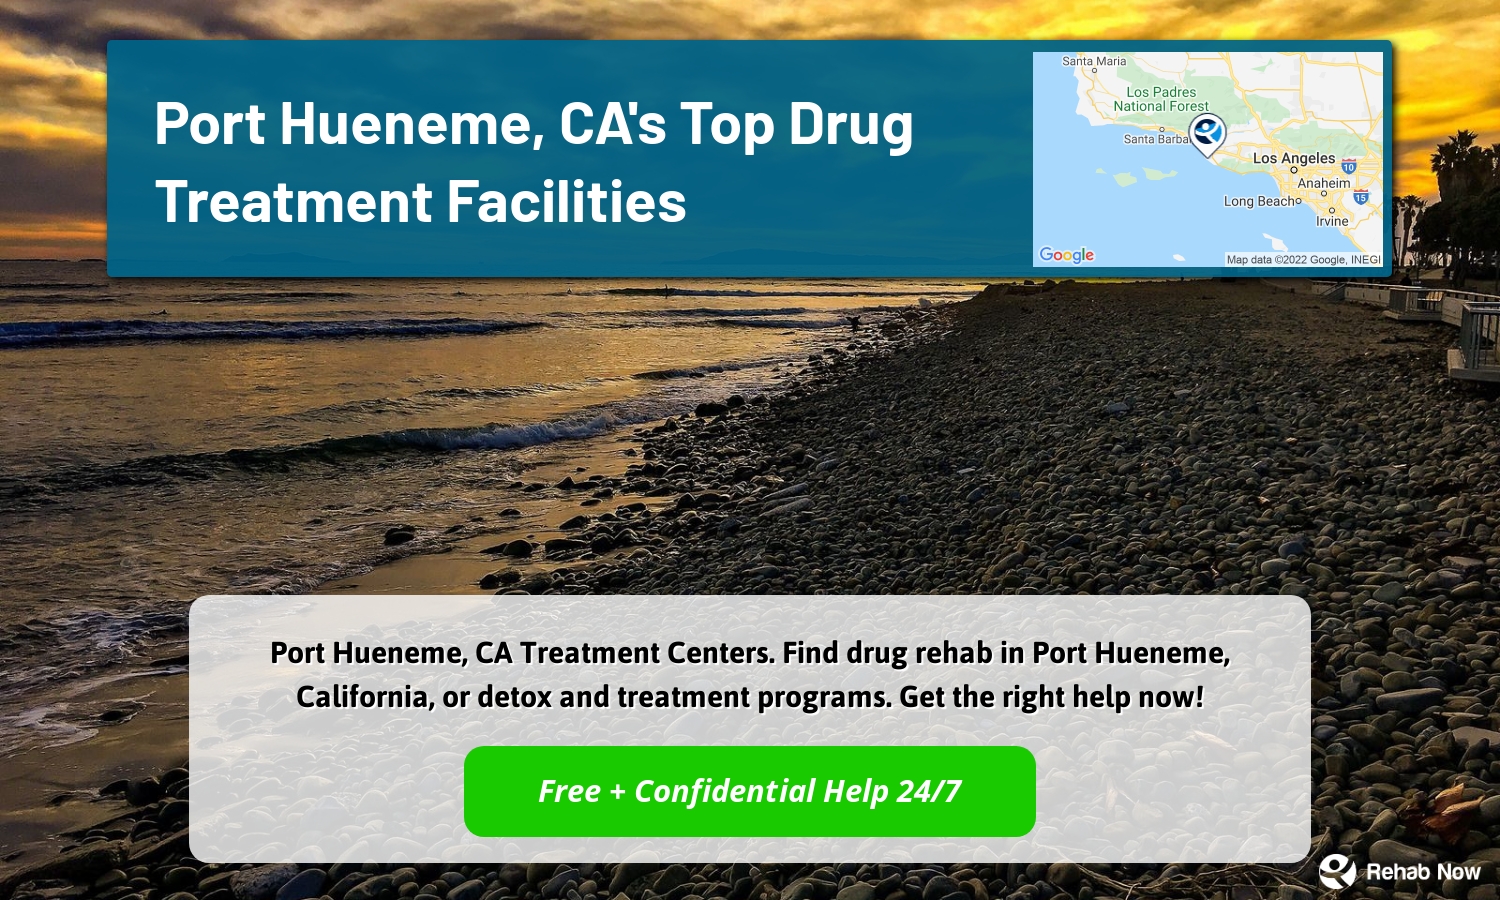 Port Hueneme, CA Treatment Centers. Find drug rehab in Port Hueneme, California, or detox and treatment programs. Get the right help now!